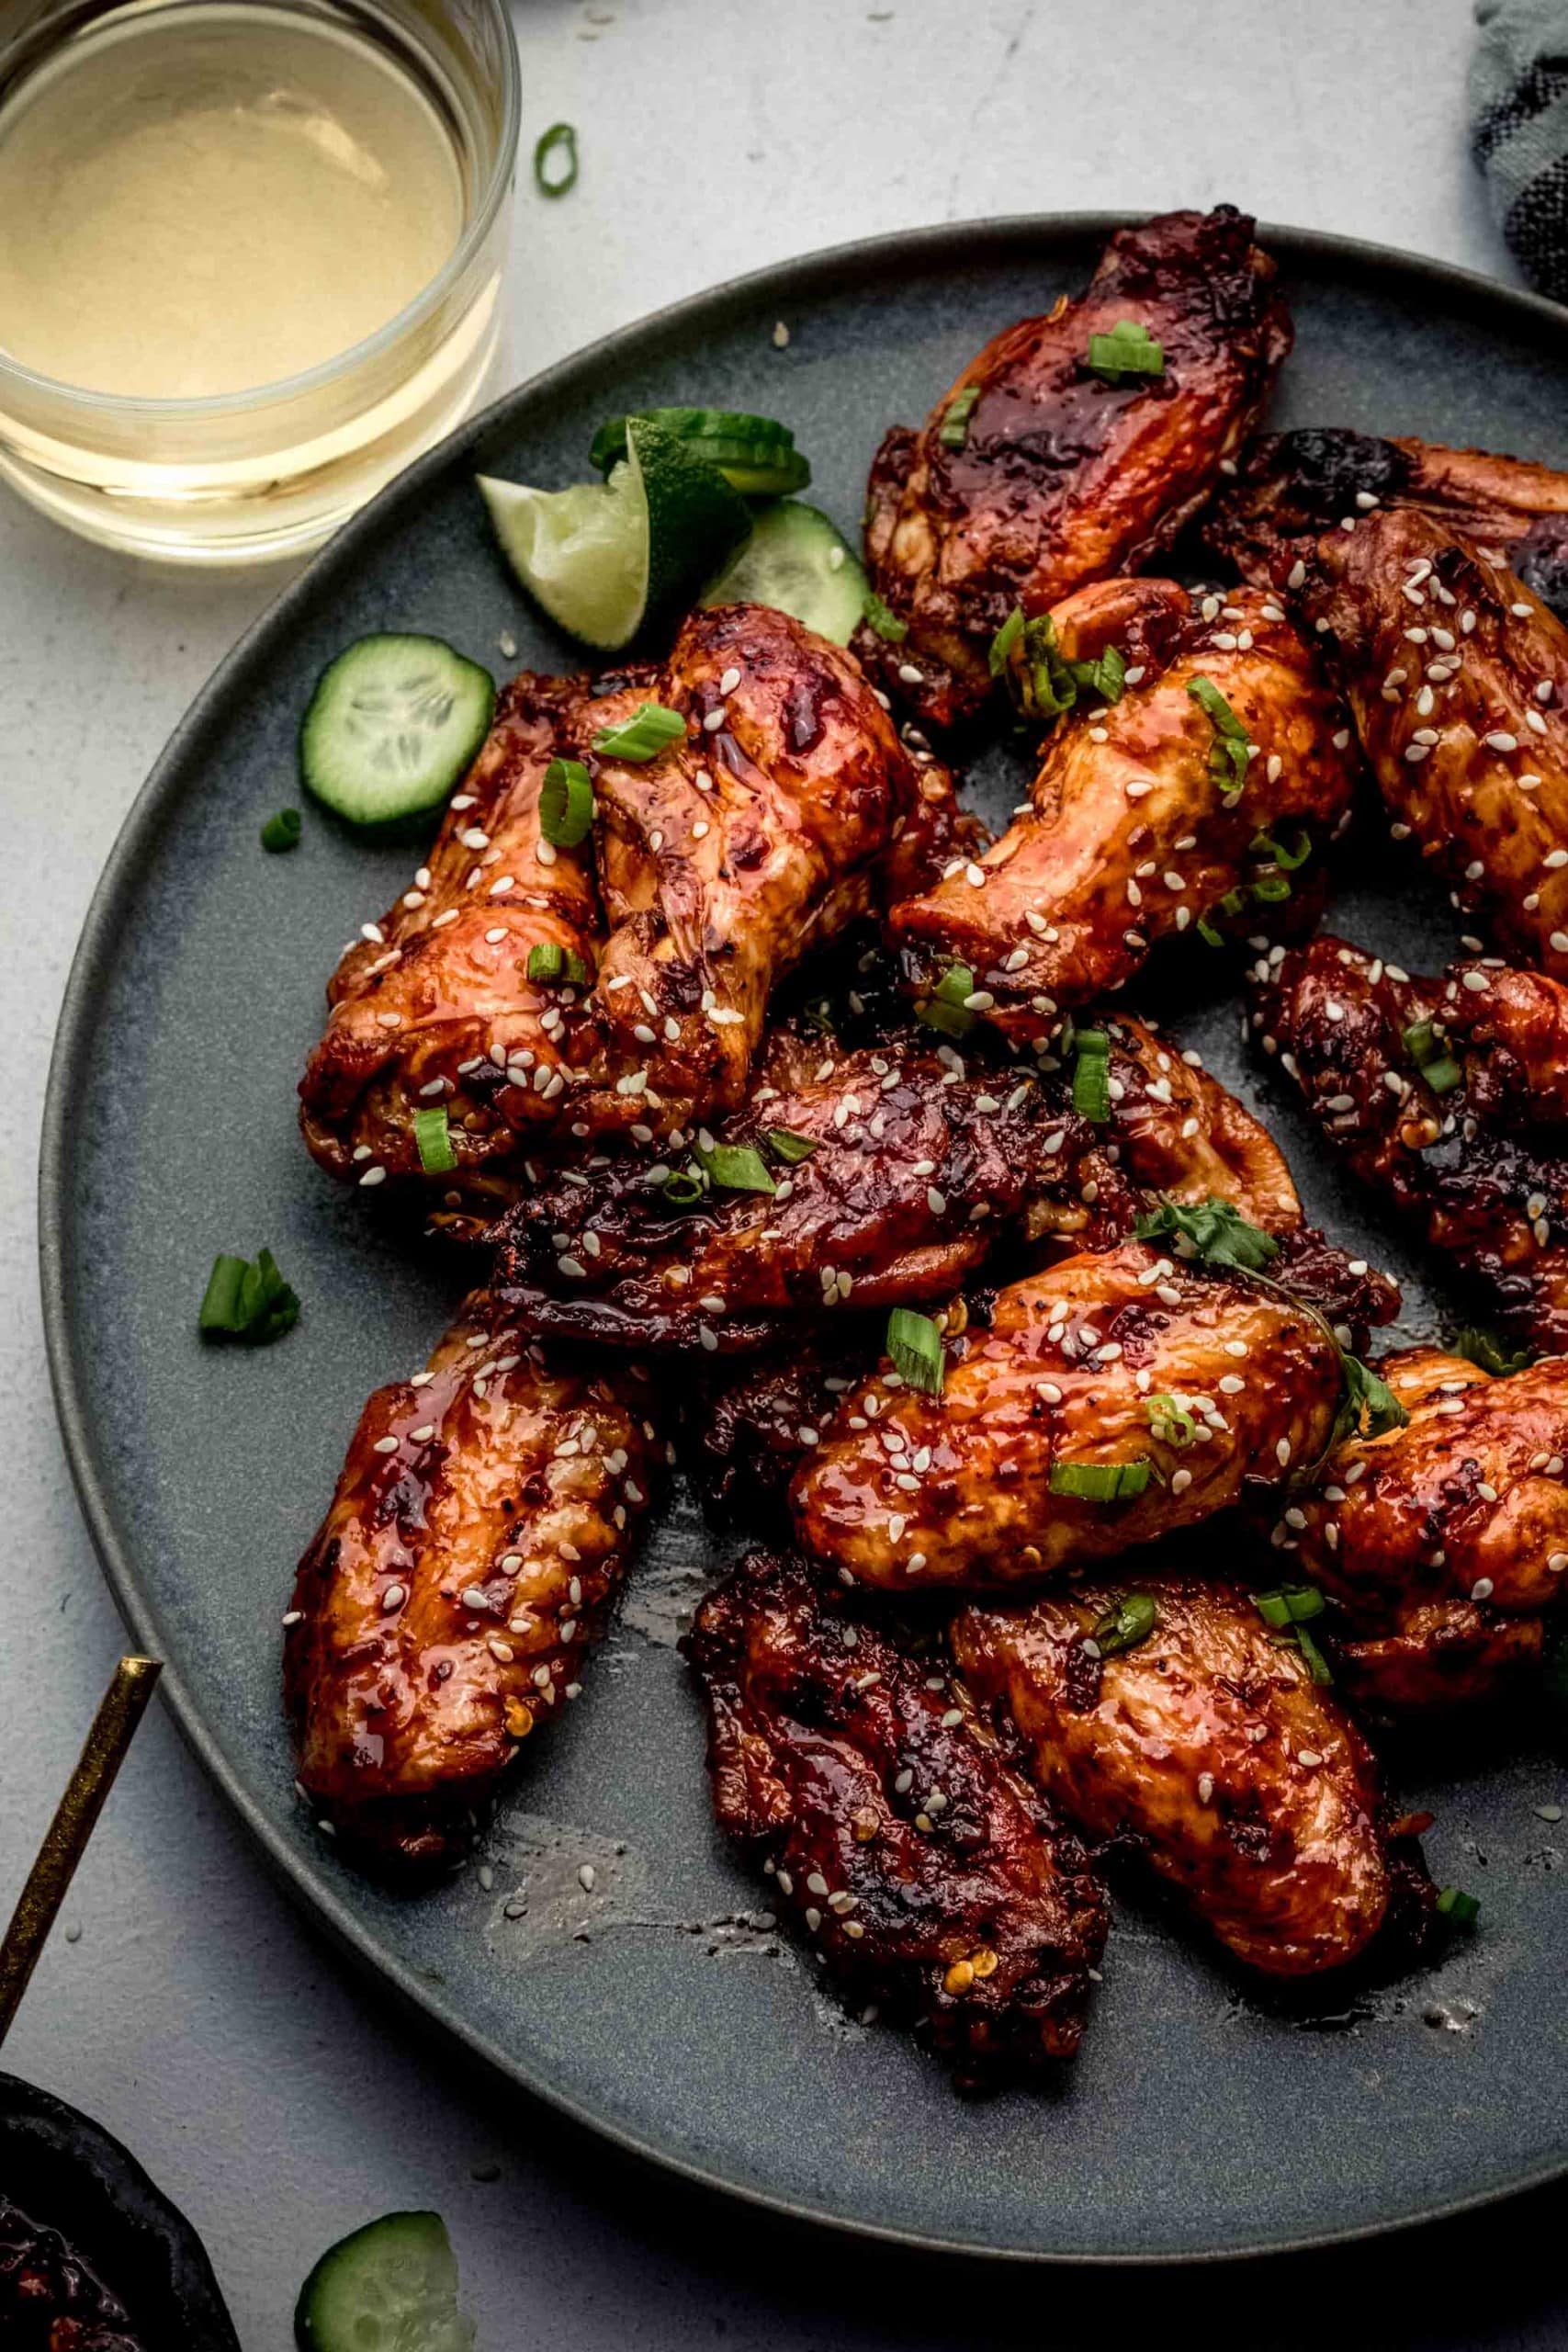 Chinese chicken wings arranged on grey plate.